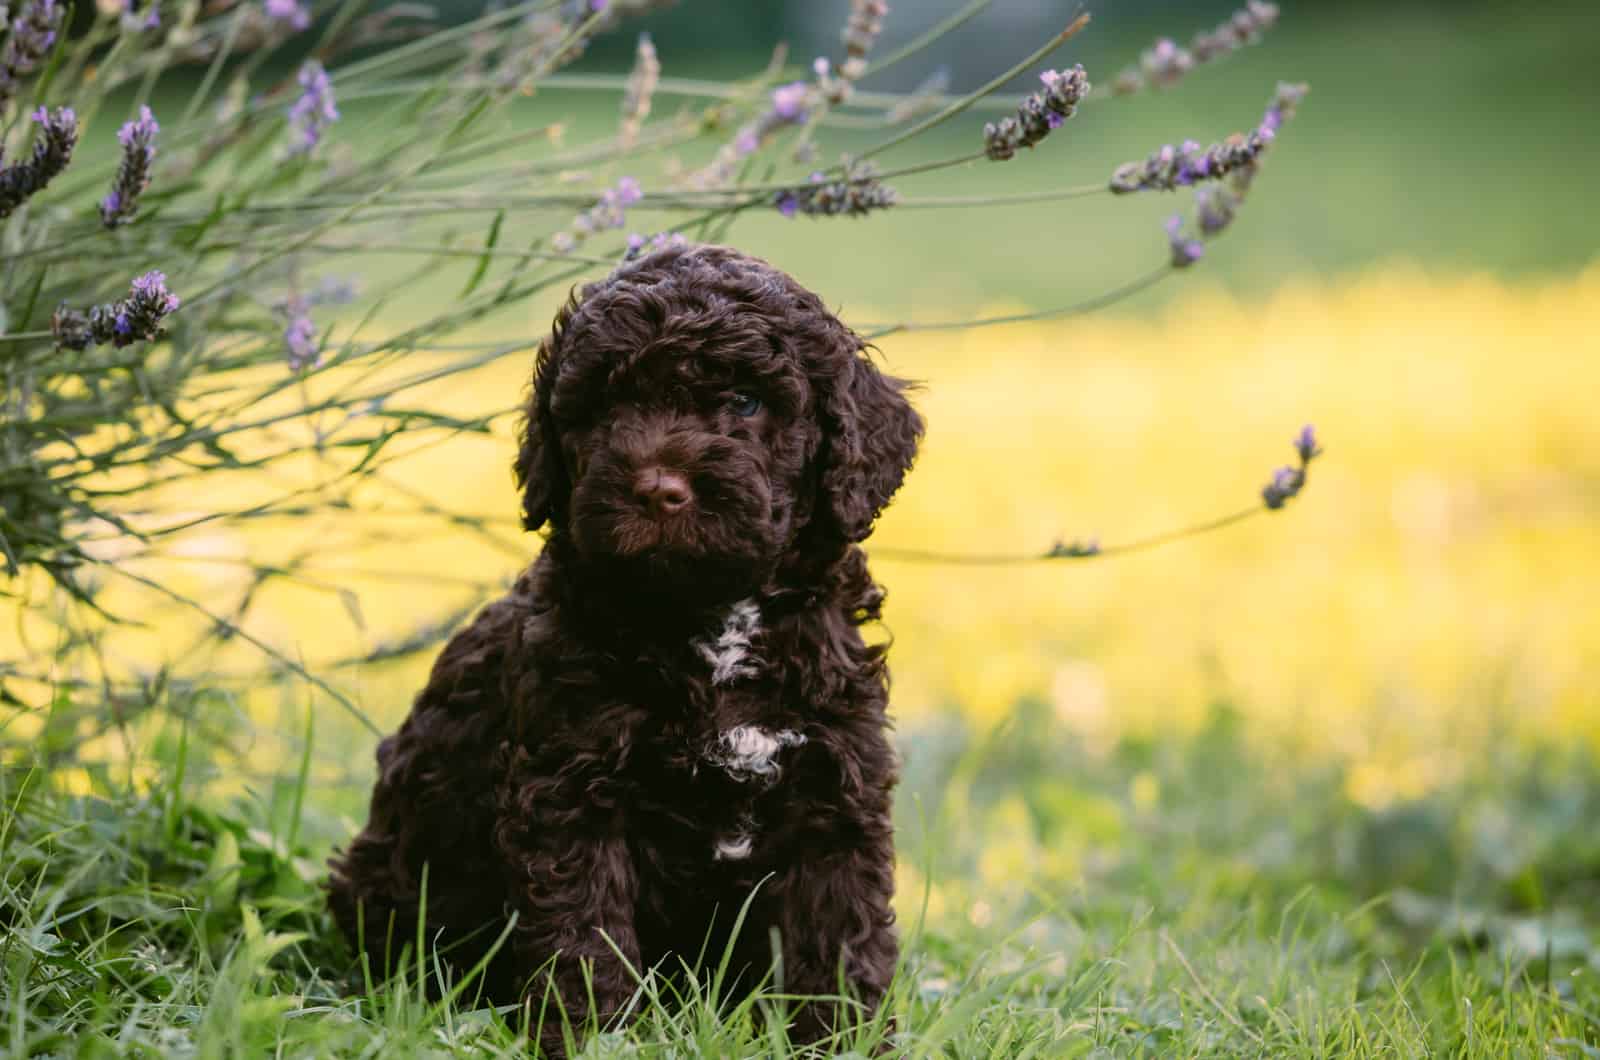 Lagotto Romagnolo puppy sits in the grass